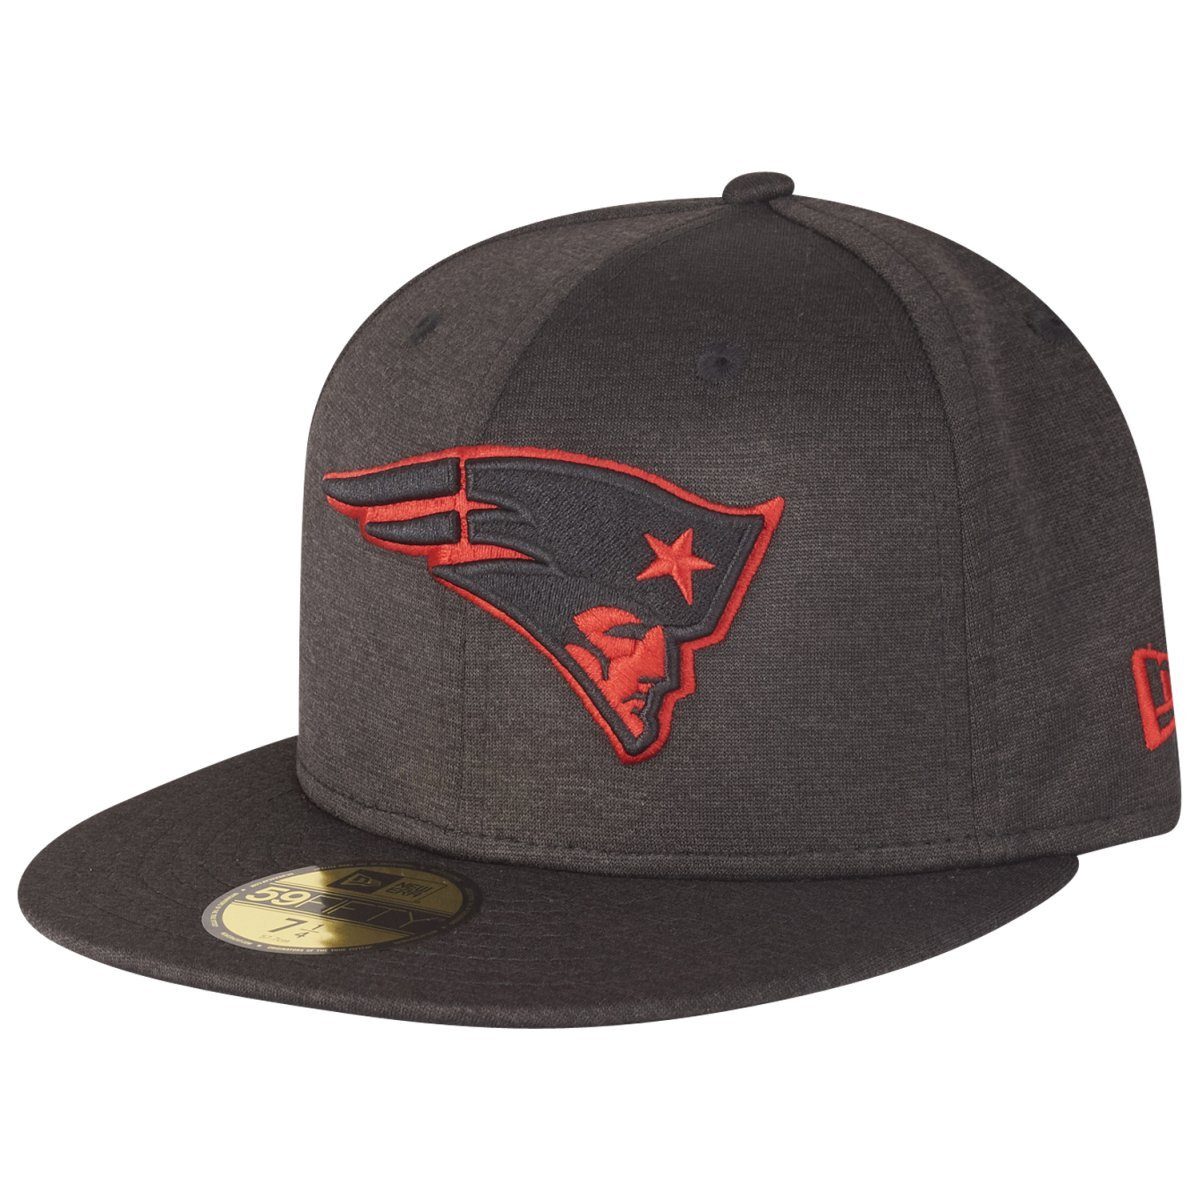 New Era Fitted Cap England TECH SHADOW 59Fifty New NFL Patriots